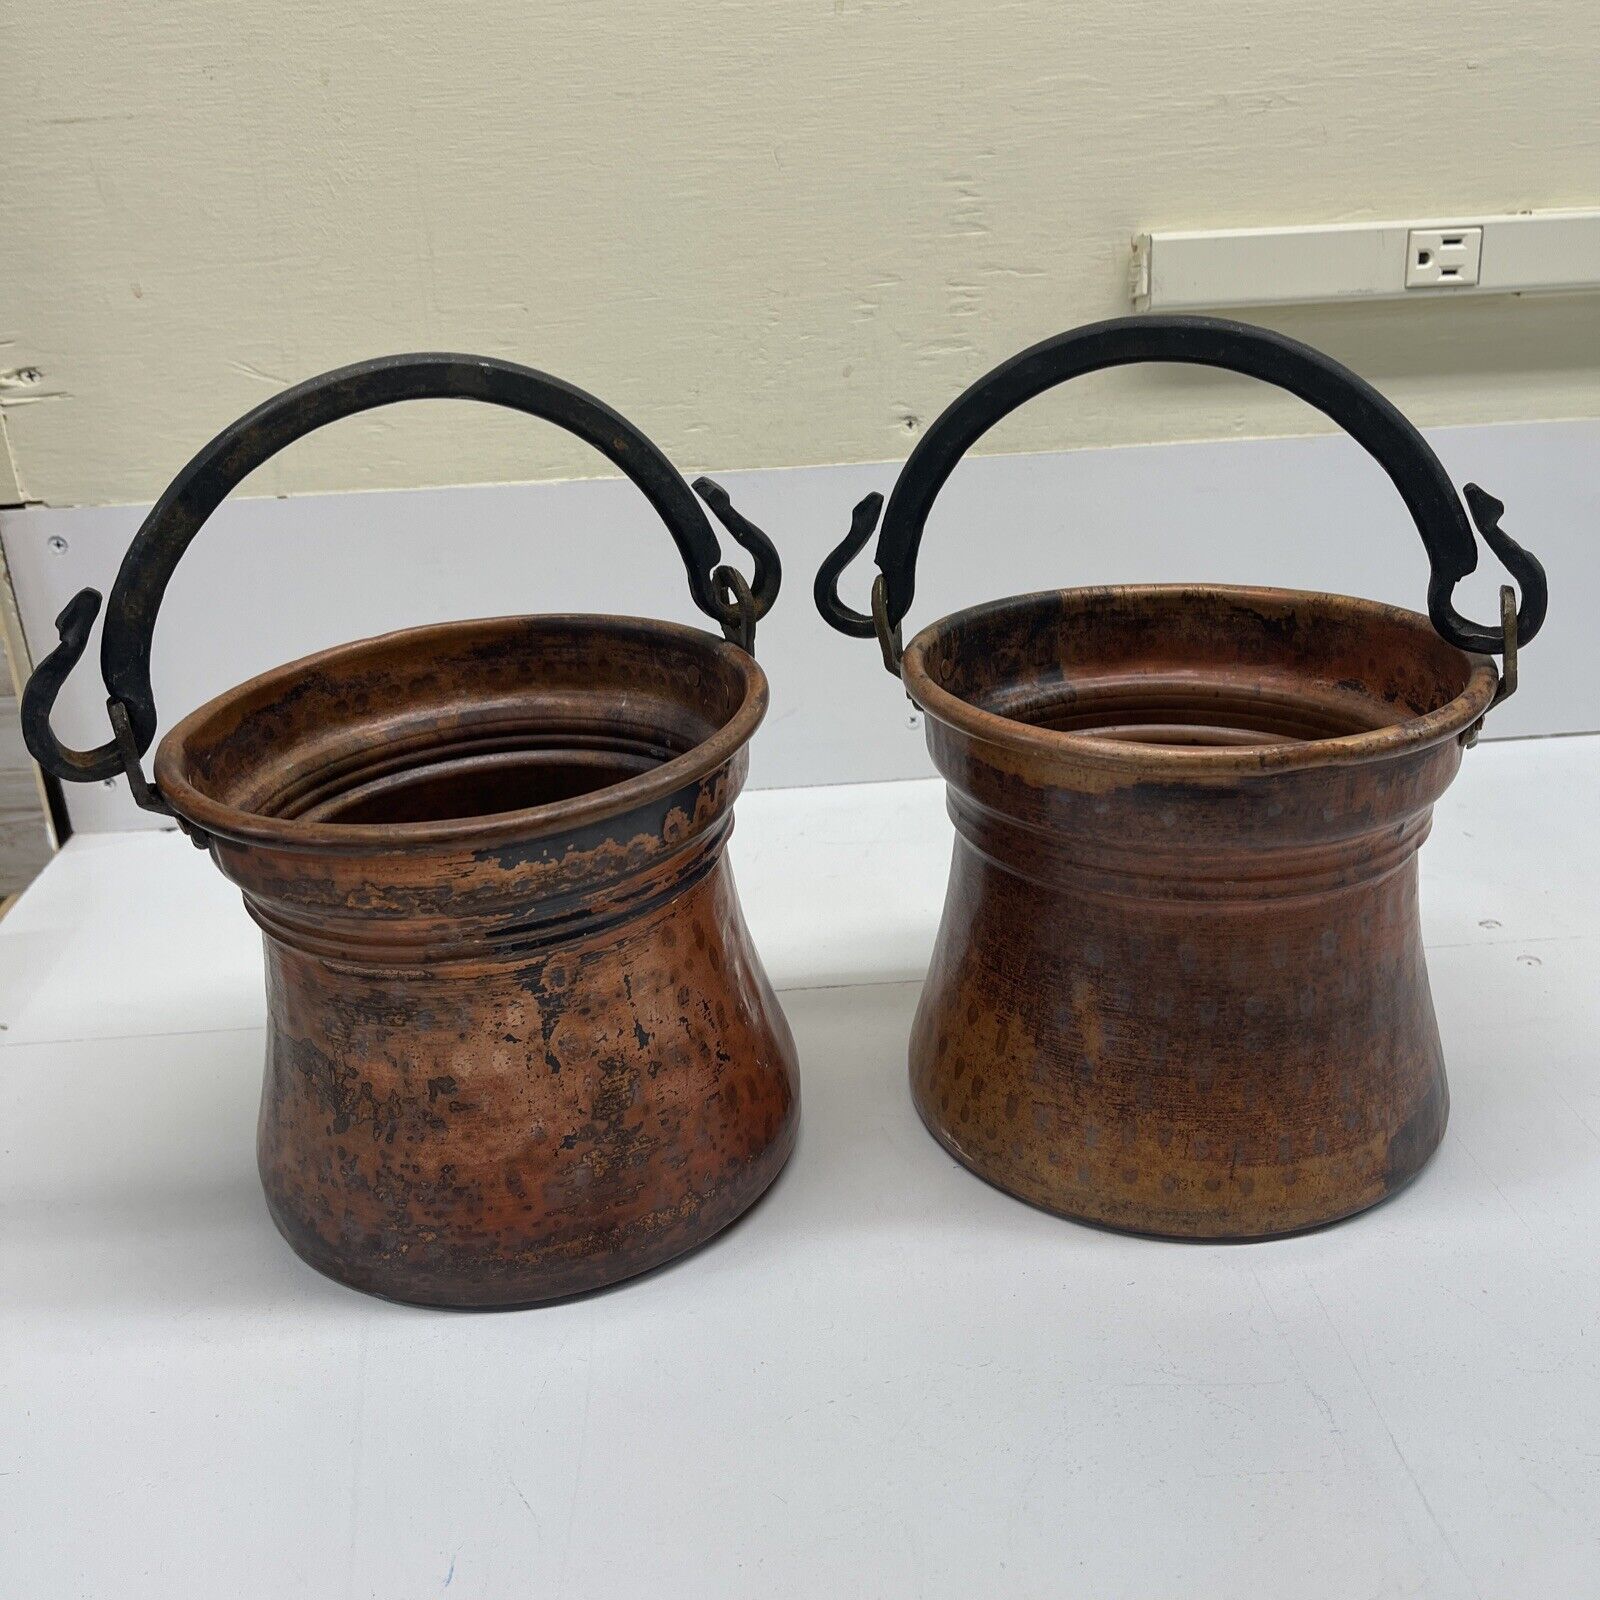 Set of 2 IMAX Vintage Copper Cauldrons Pots Planters with Handles Made in Turkey